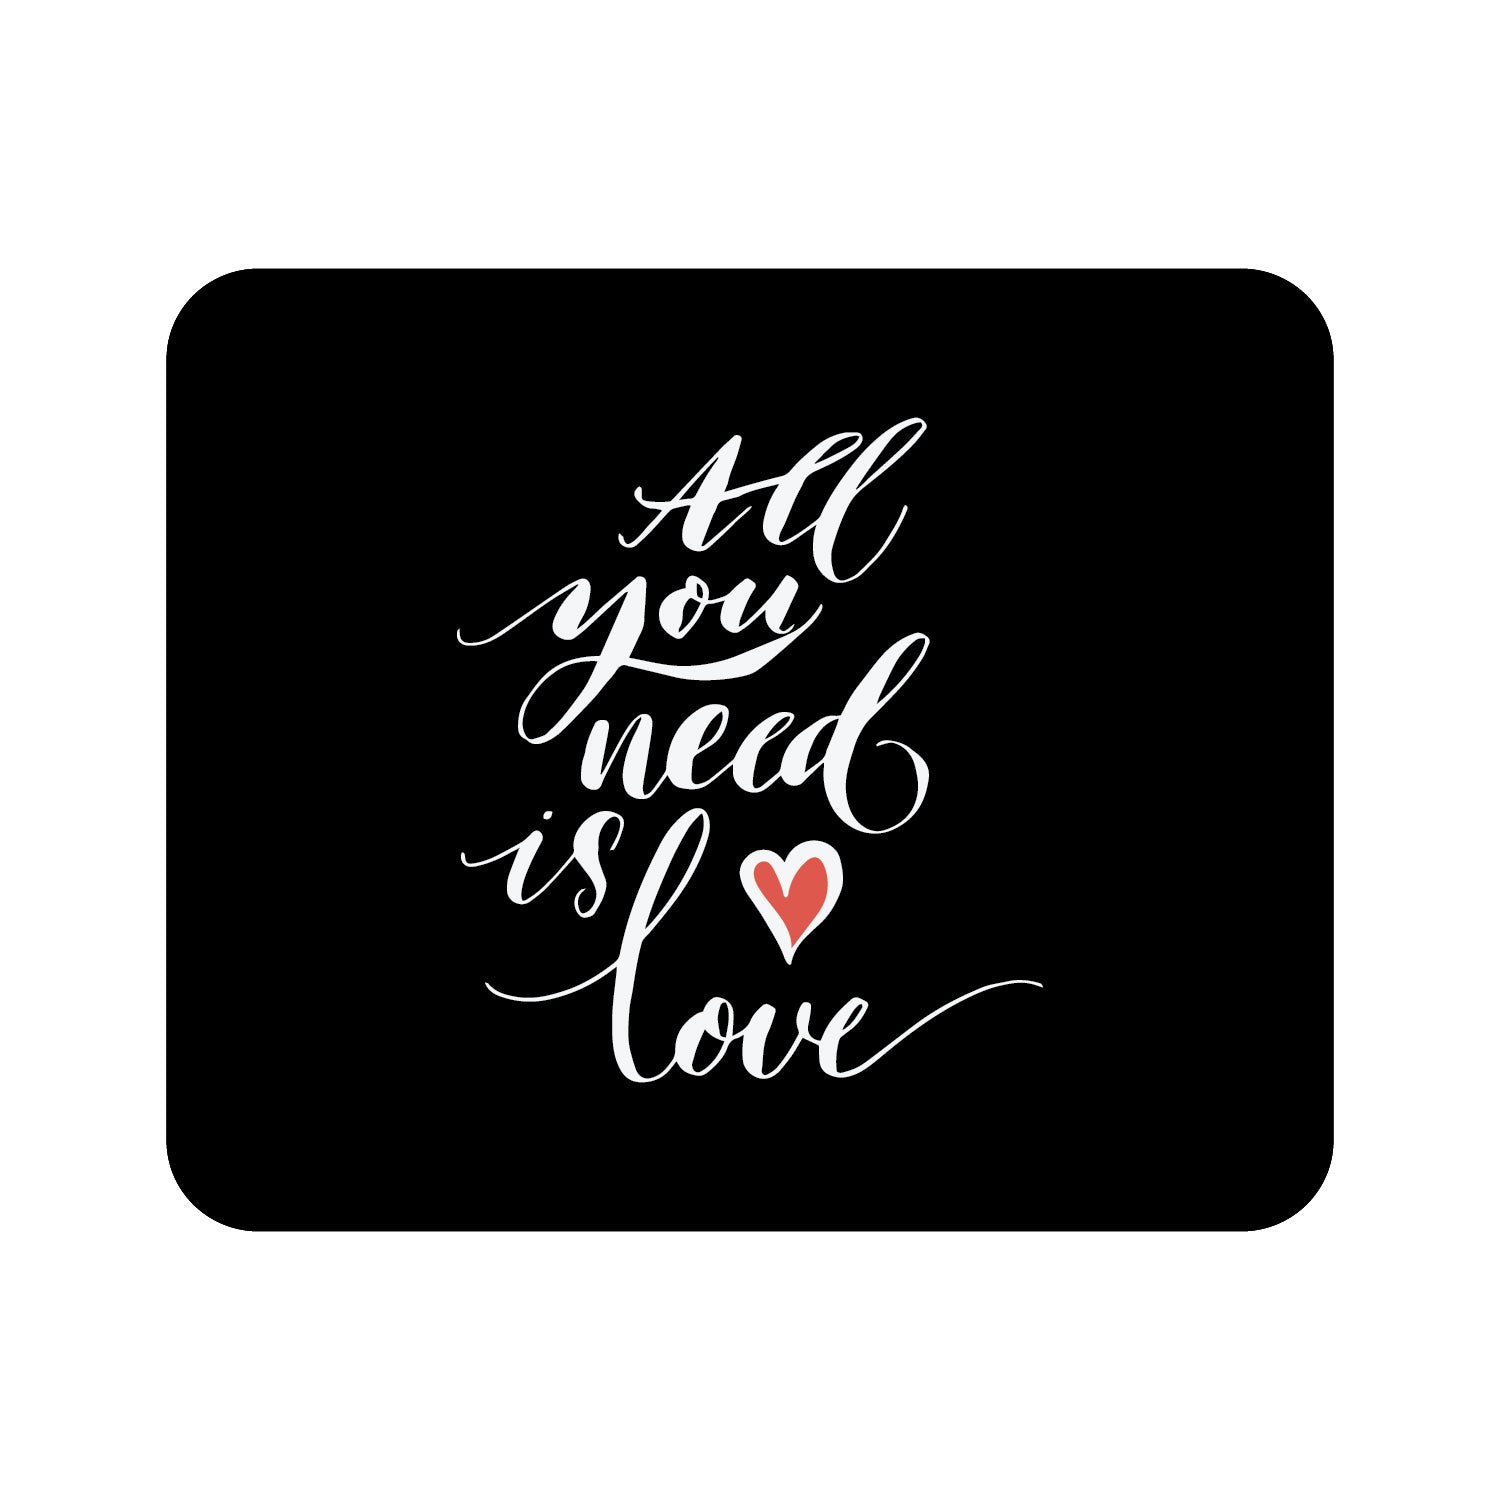 OTM Prints Black Mouse Pad, All You Need is Love White